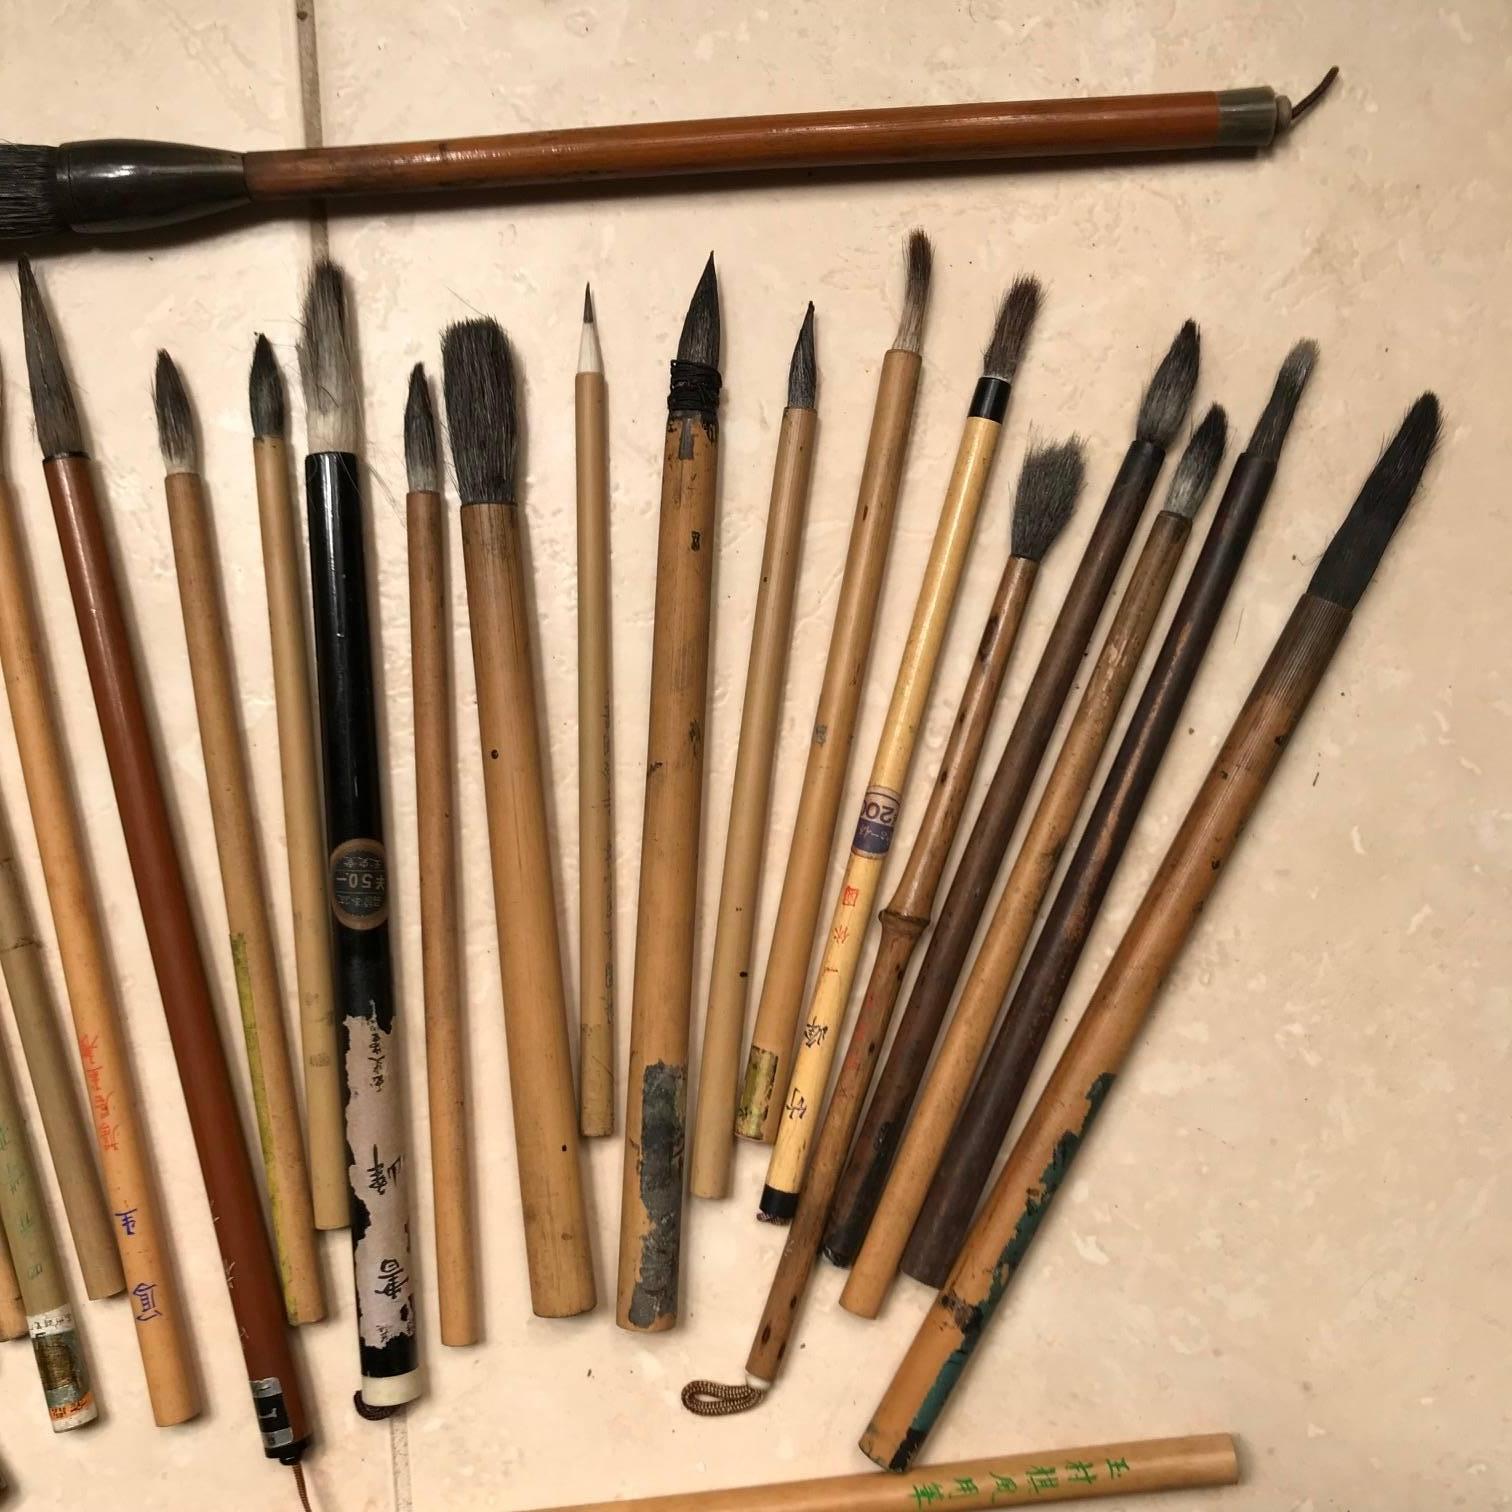 Hand-Crafted Artisan's Cache of 25 Old Chinese Paint Calligraphy Bamboo Brushes